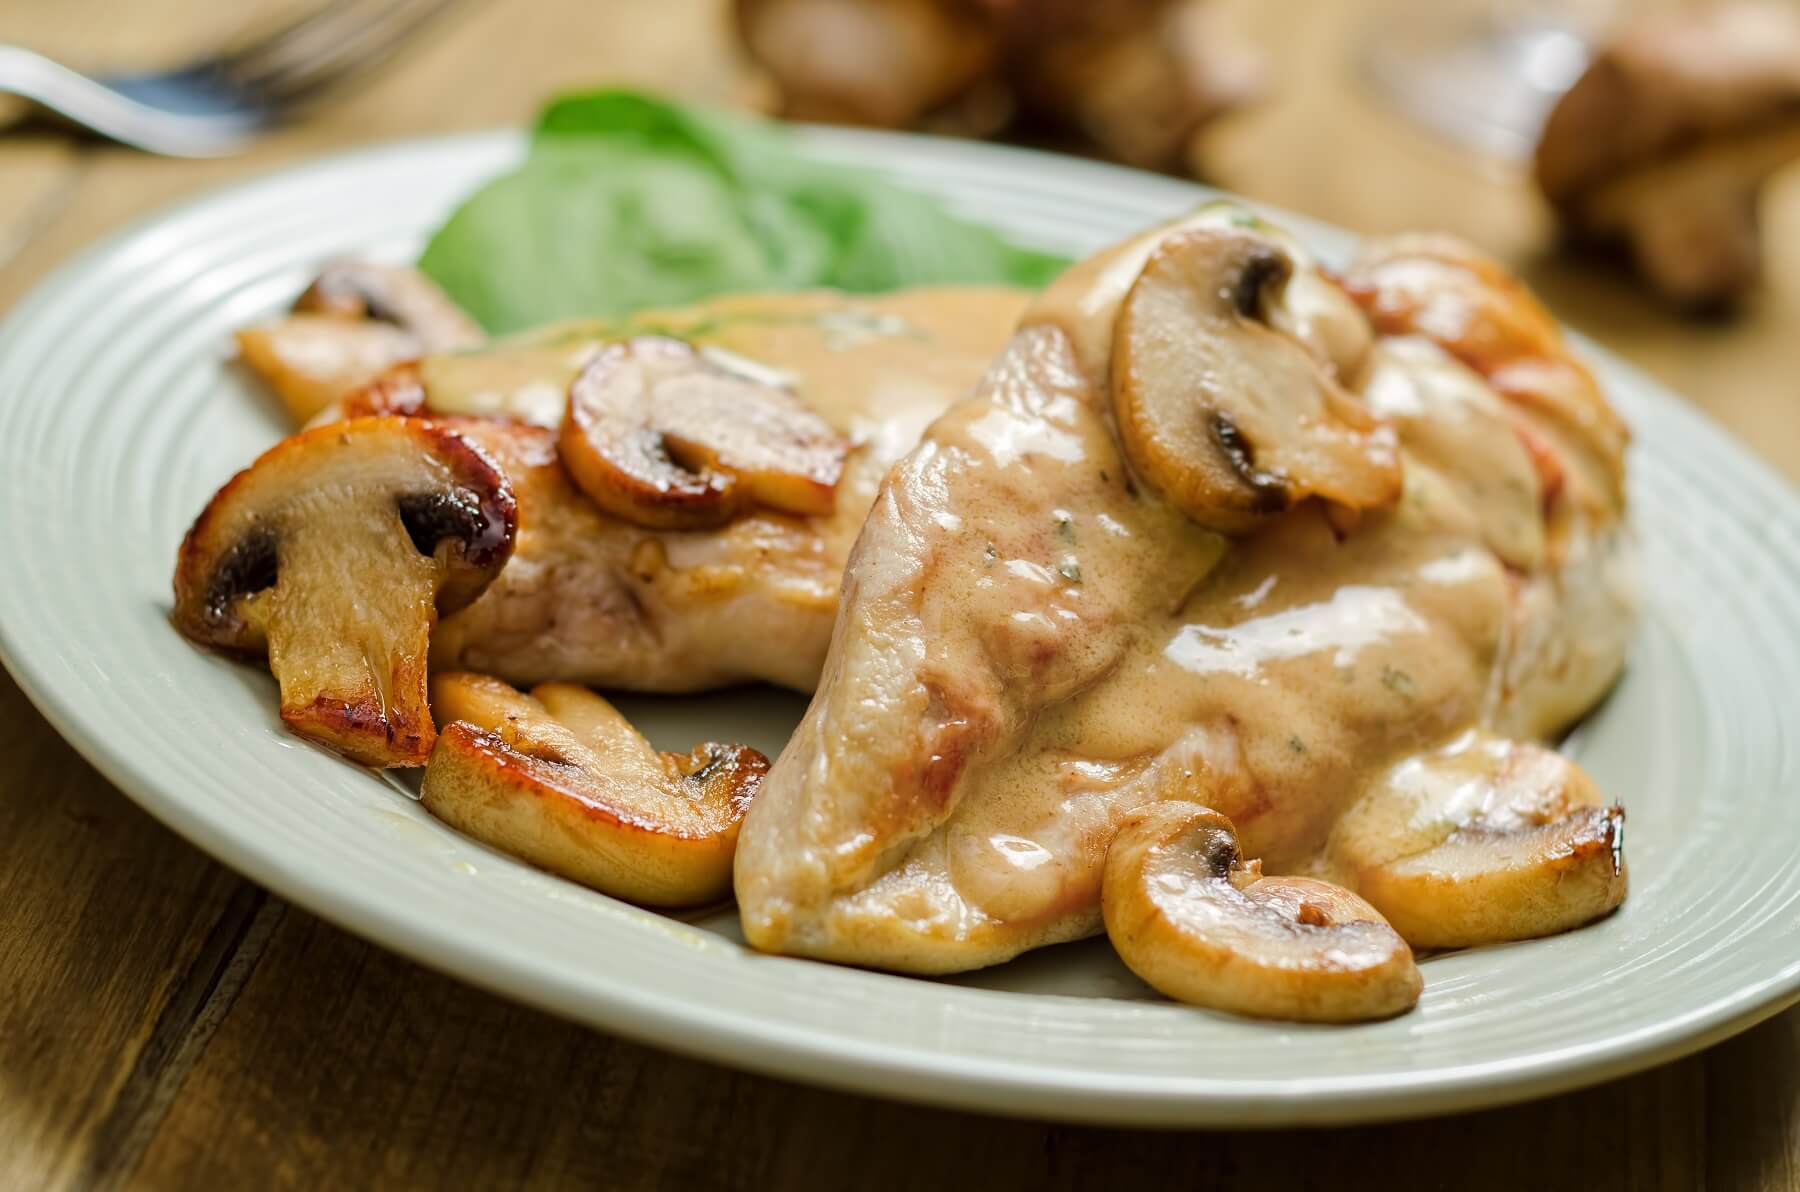 (Relatively) Healthy Chicken in Cream and Mushroom Sauce Recipe